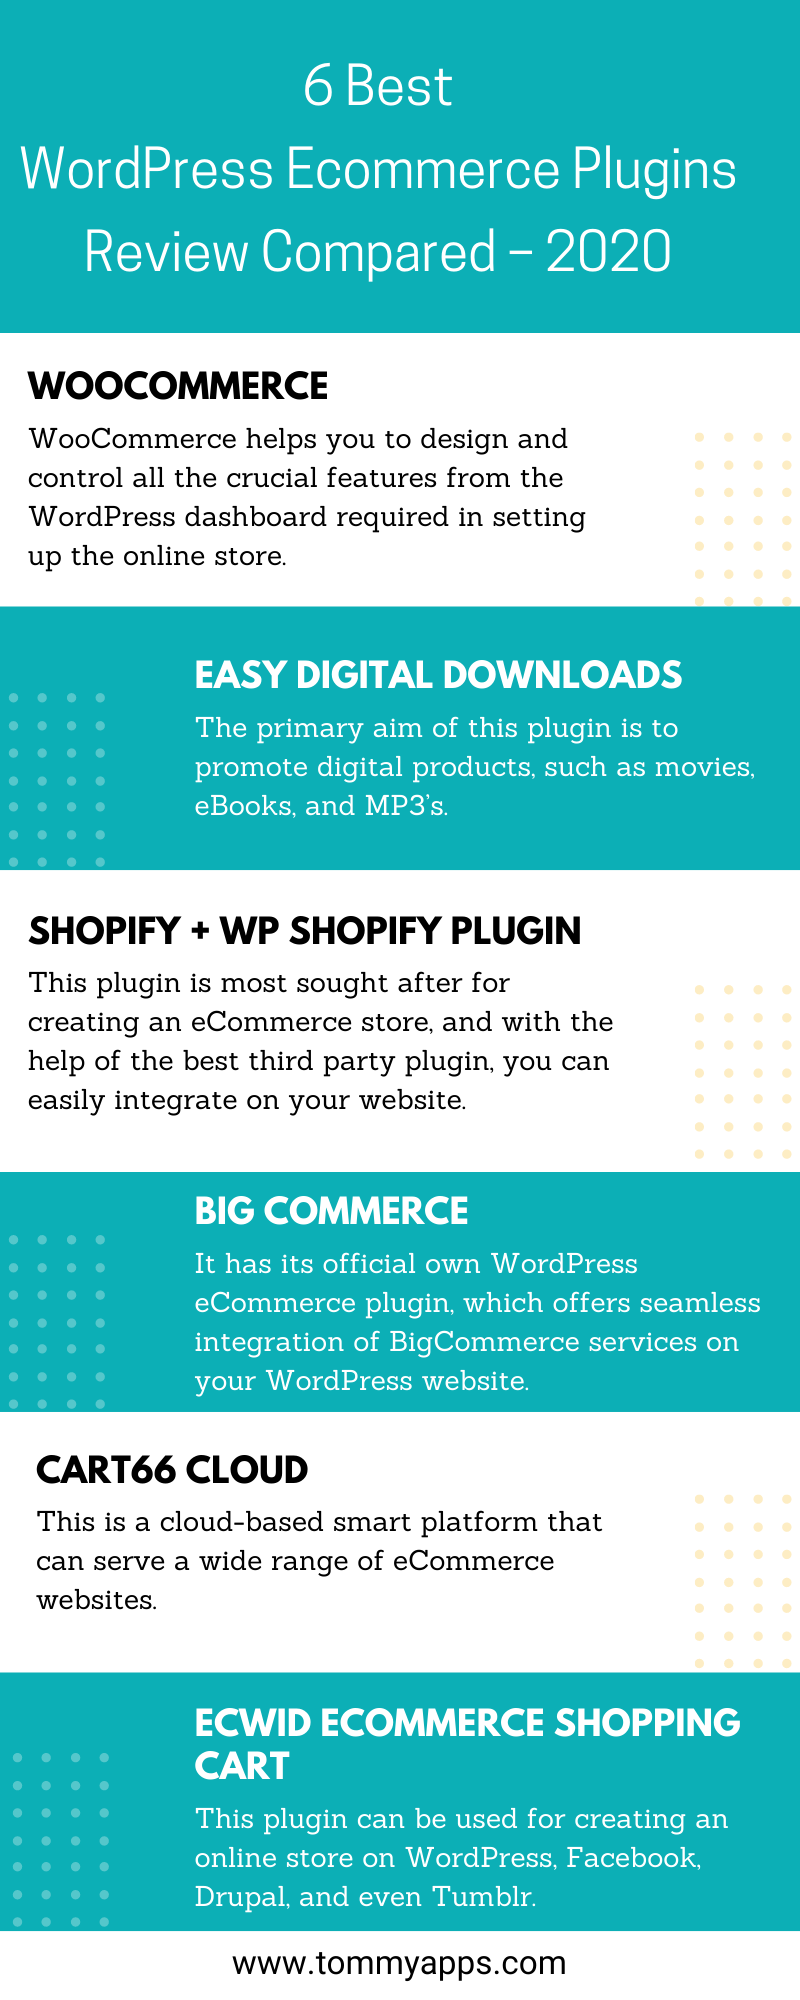 6 Best WordPress Ecommerce Plugins Review Compared – 2020